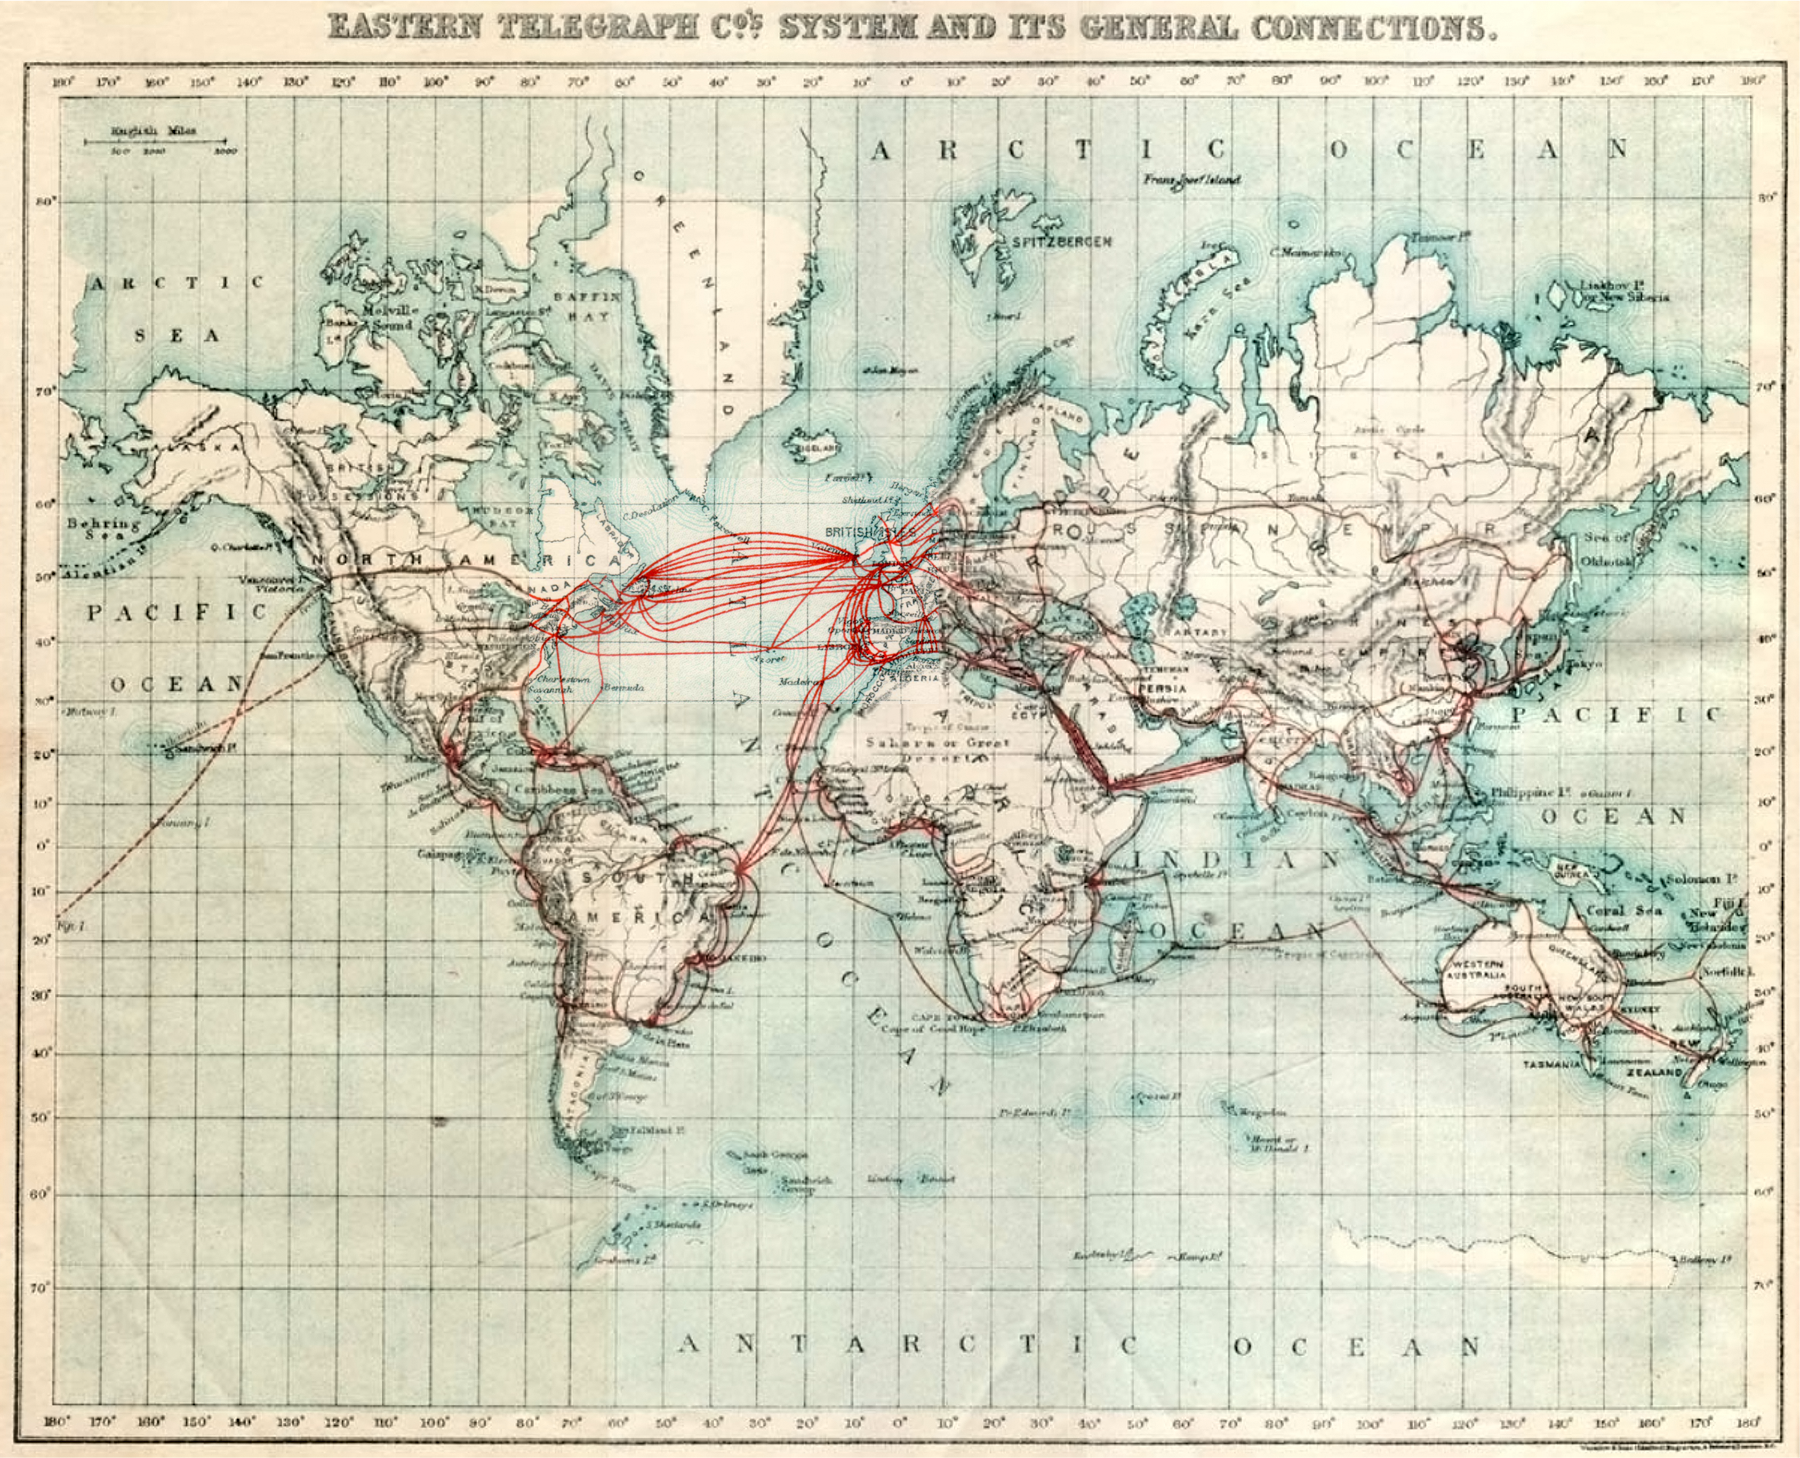 submarine telegraph cable routes